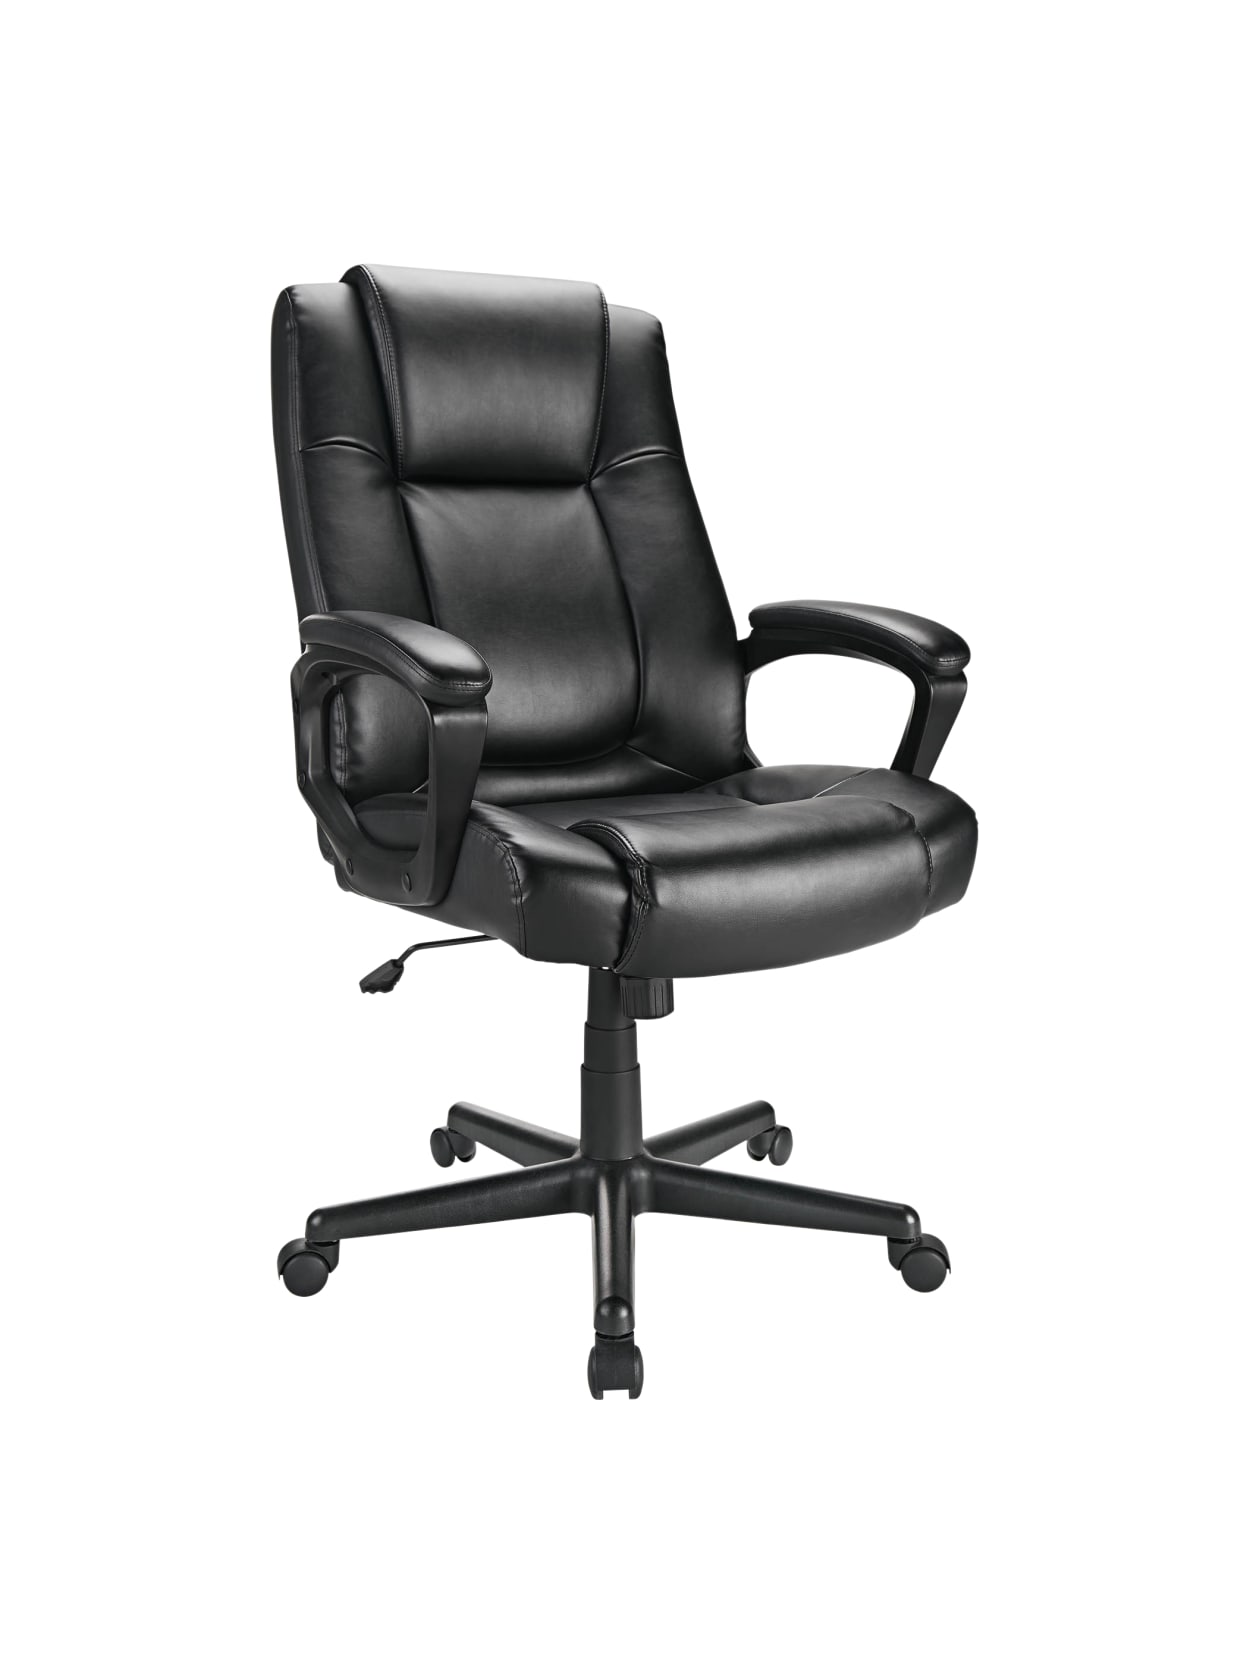 Realspace Hurston Leather High Back Chair Office Depot